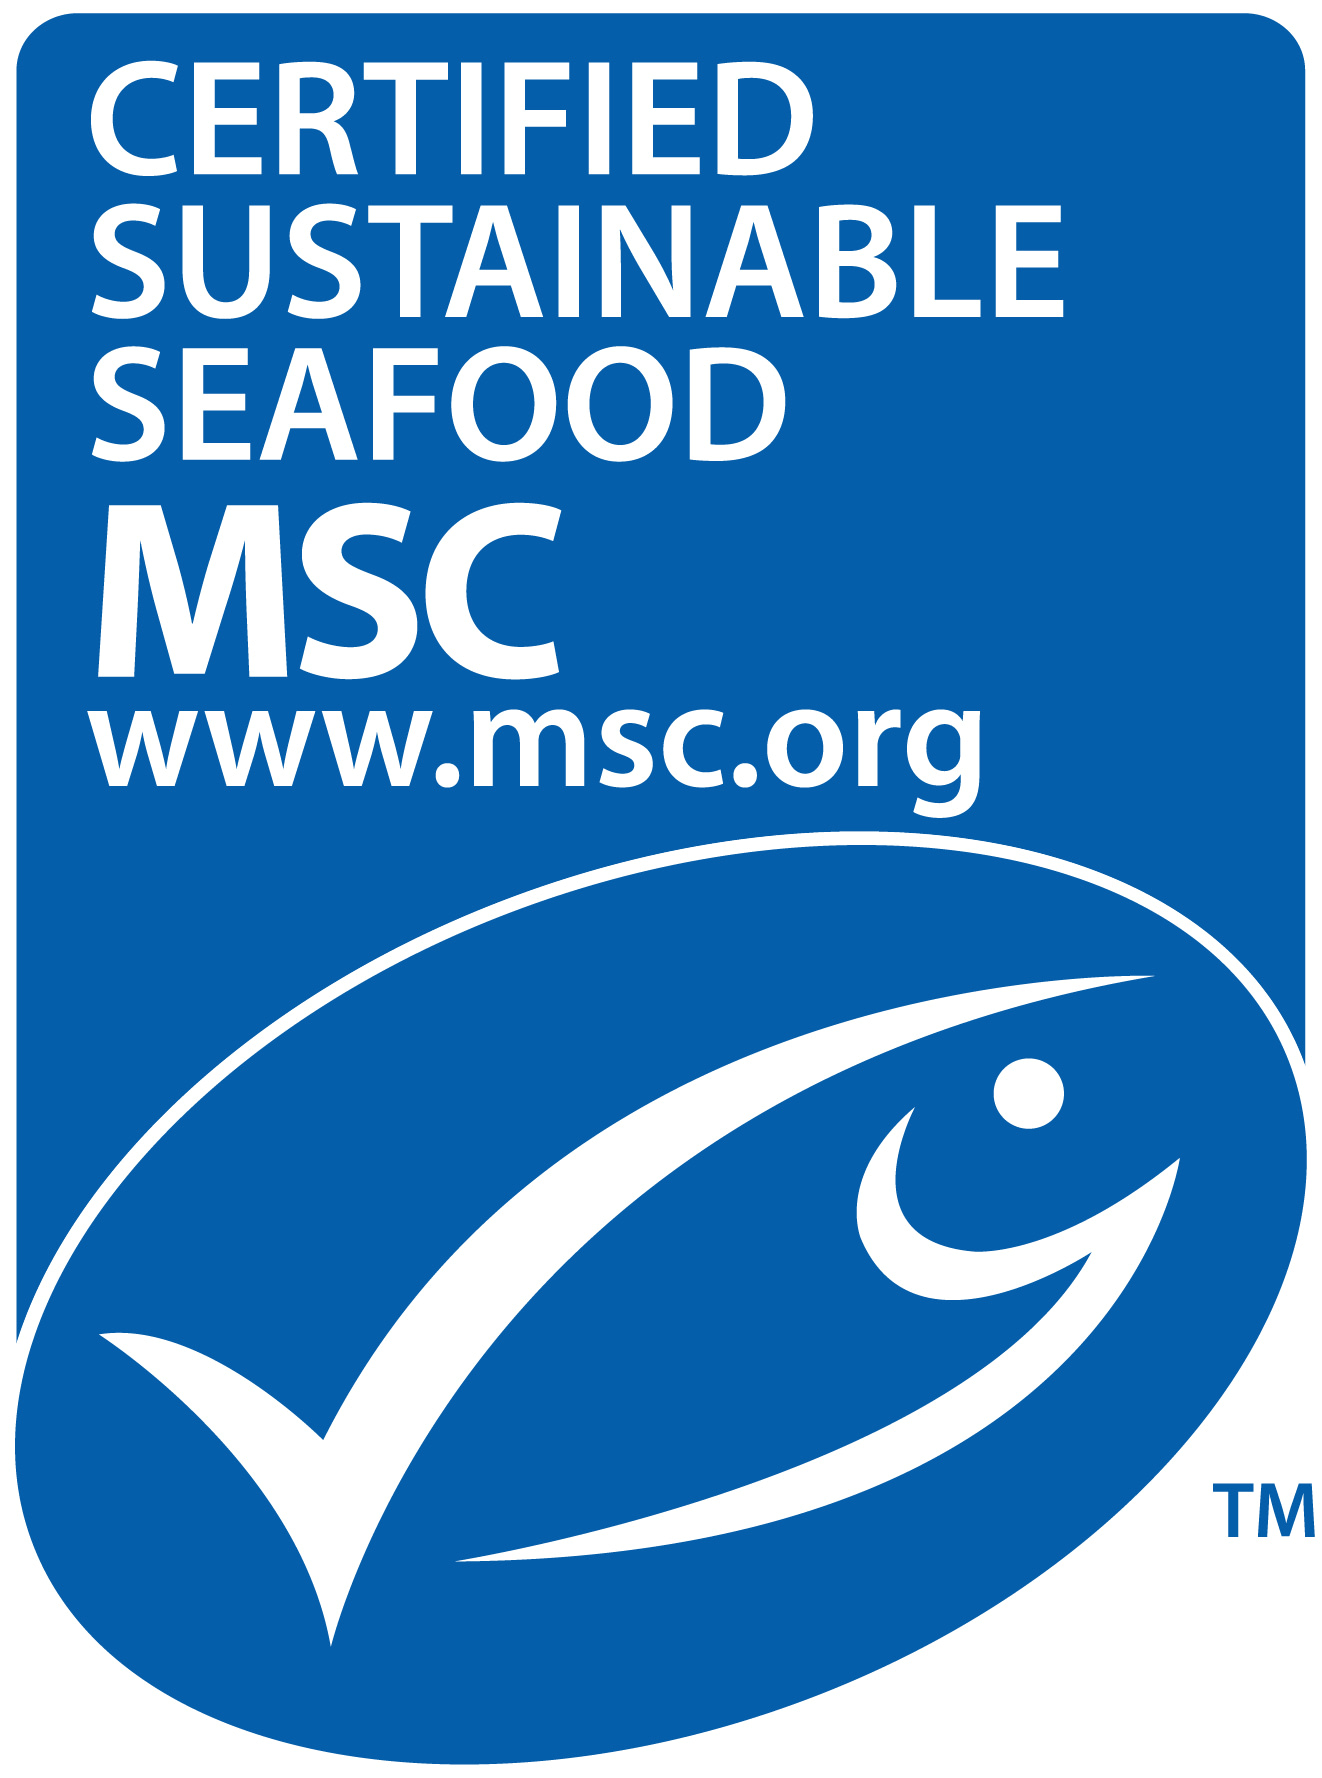 Marine Stewardship Council (MSC) - Blue Fish Logo - Certified Sustainable Seafood